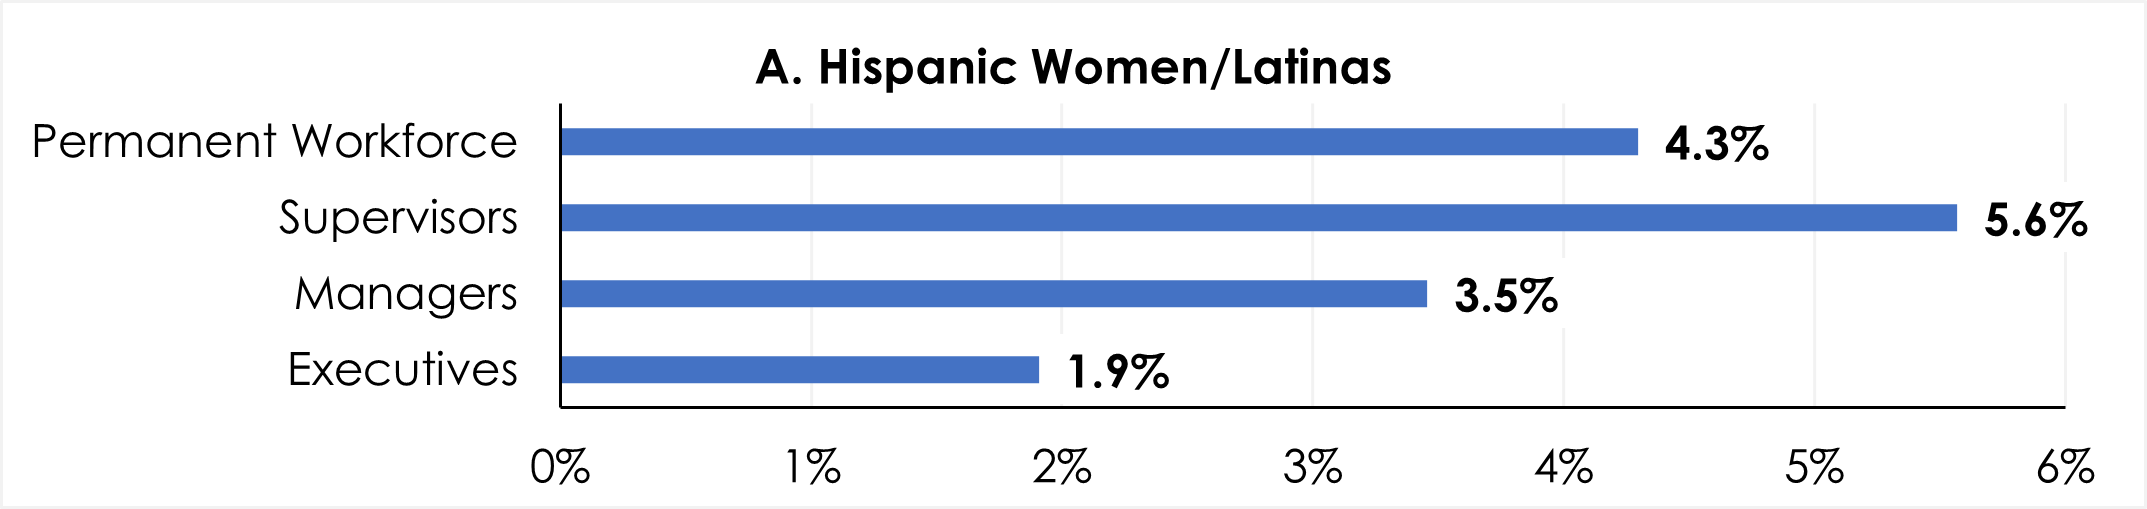 Figure 6A shows that, compared to the permanent workforce overall, Hispanic and Latina women were more likely to be supervisors, but less likely to be managers and executives.  4.3% Hispanic/Latina Women in the Federal sector permanent workforce.   5.6%Hispanic/Latina Women are supervisors in the Federal sector.  3.5% Hispanic/Latina Women are managers in the Federal sector.  1.9% Hispanic/Latina Women are executives in the Federal sector.